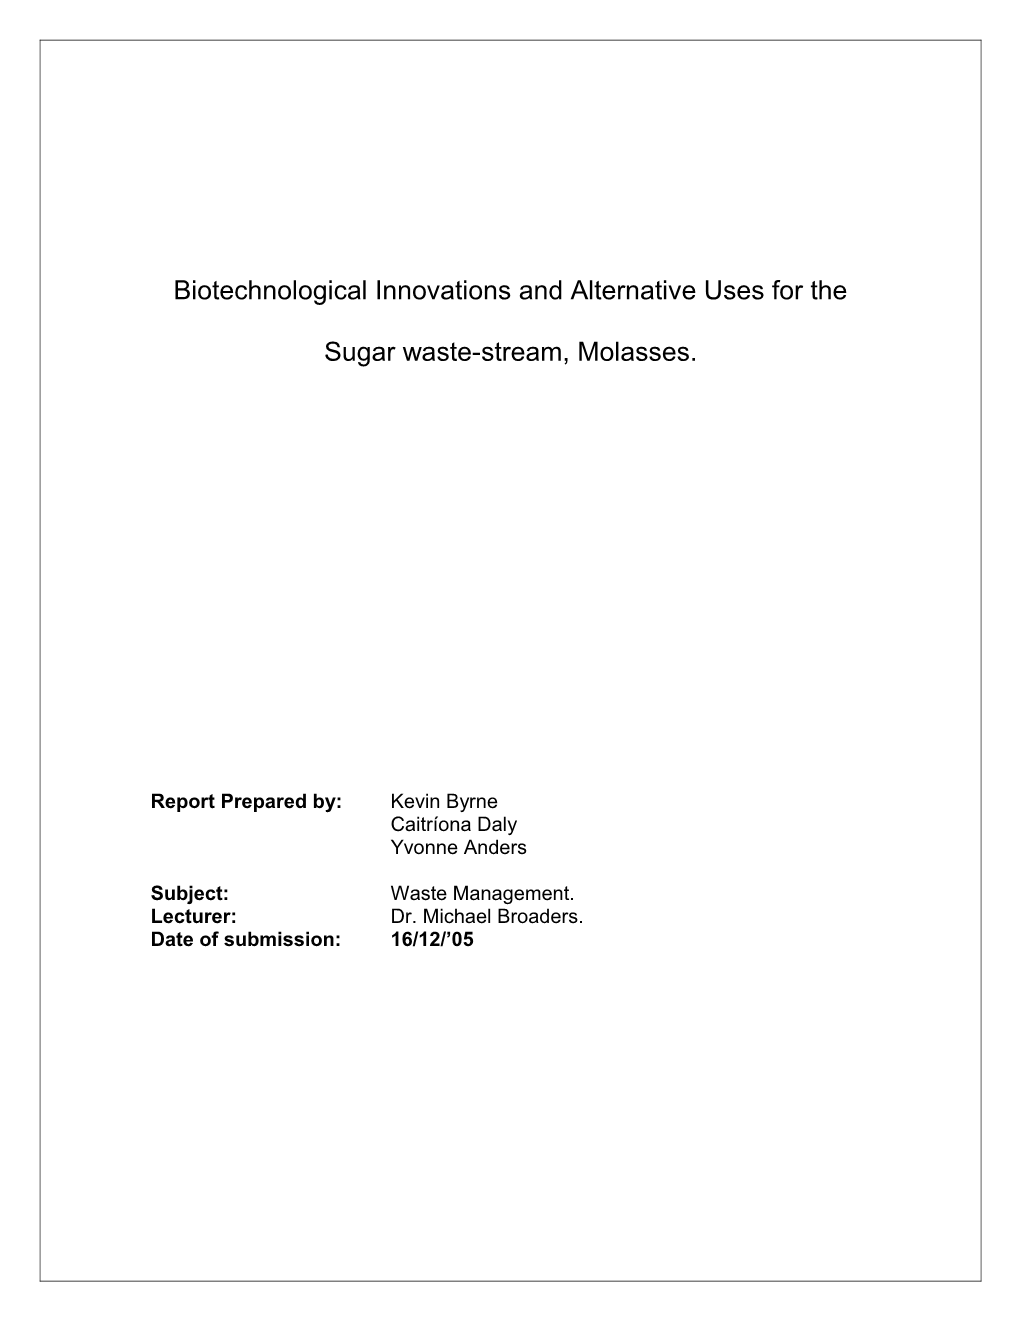 Biotechnological Innovations and Alternative Uses for the Sugar Waste-Stream, Molasses